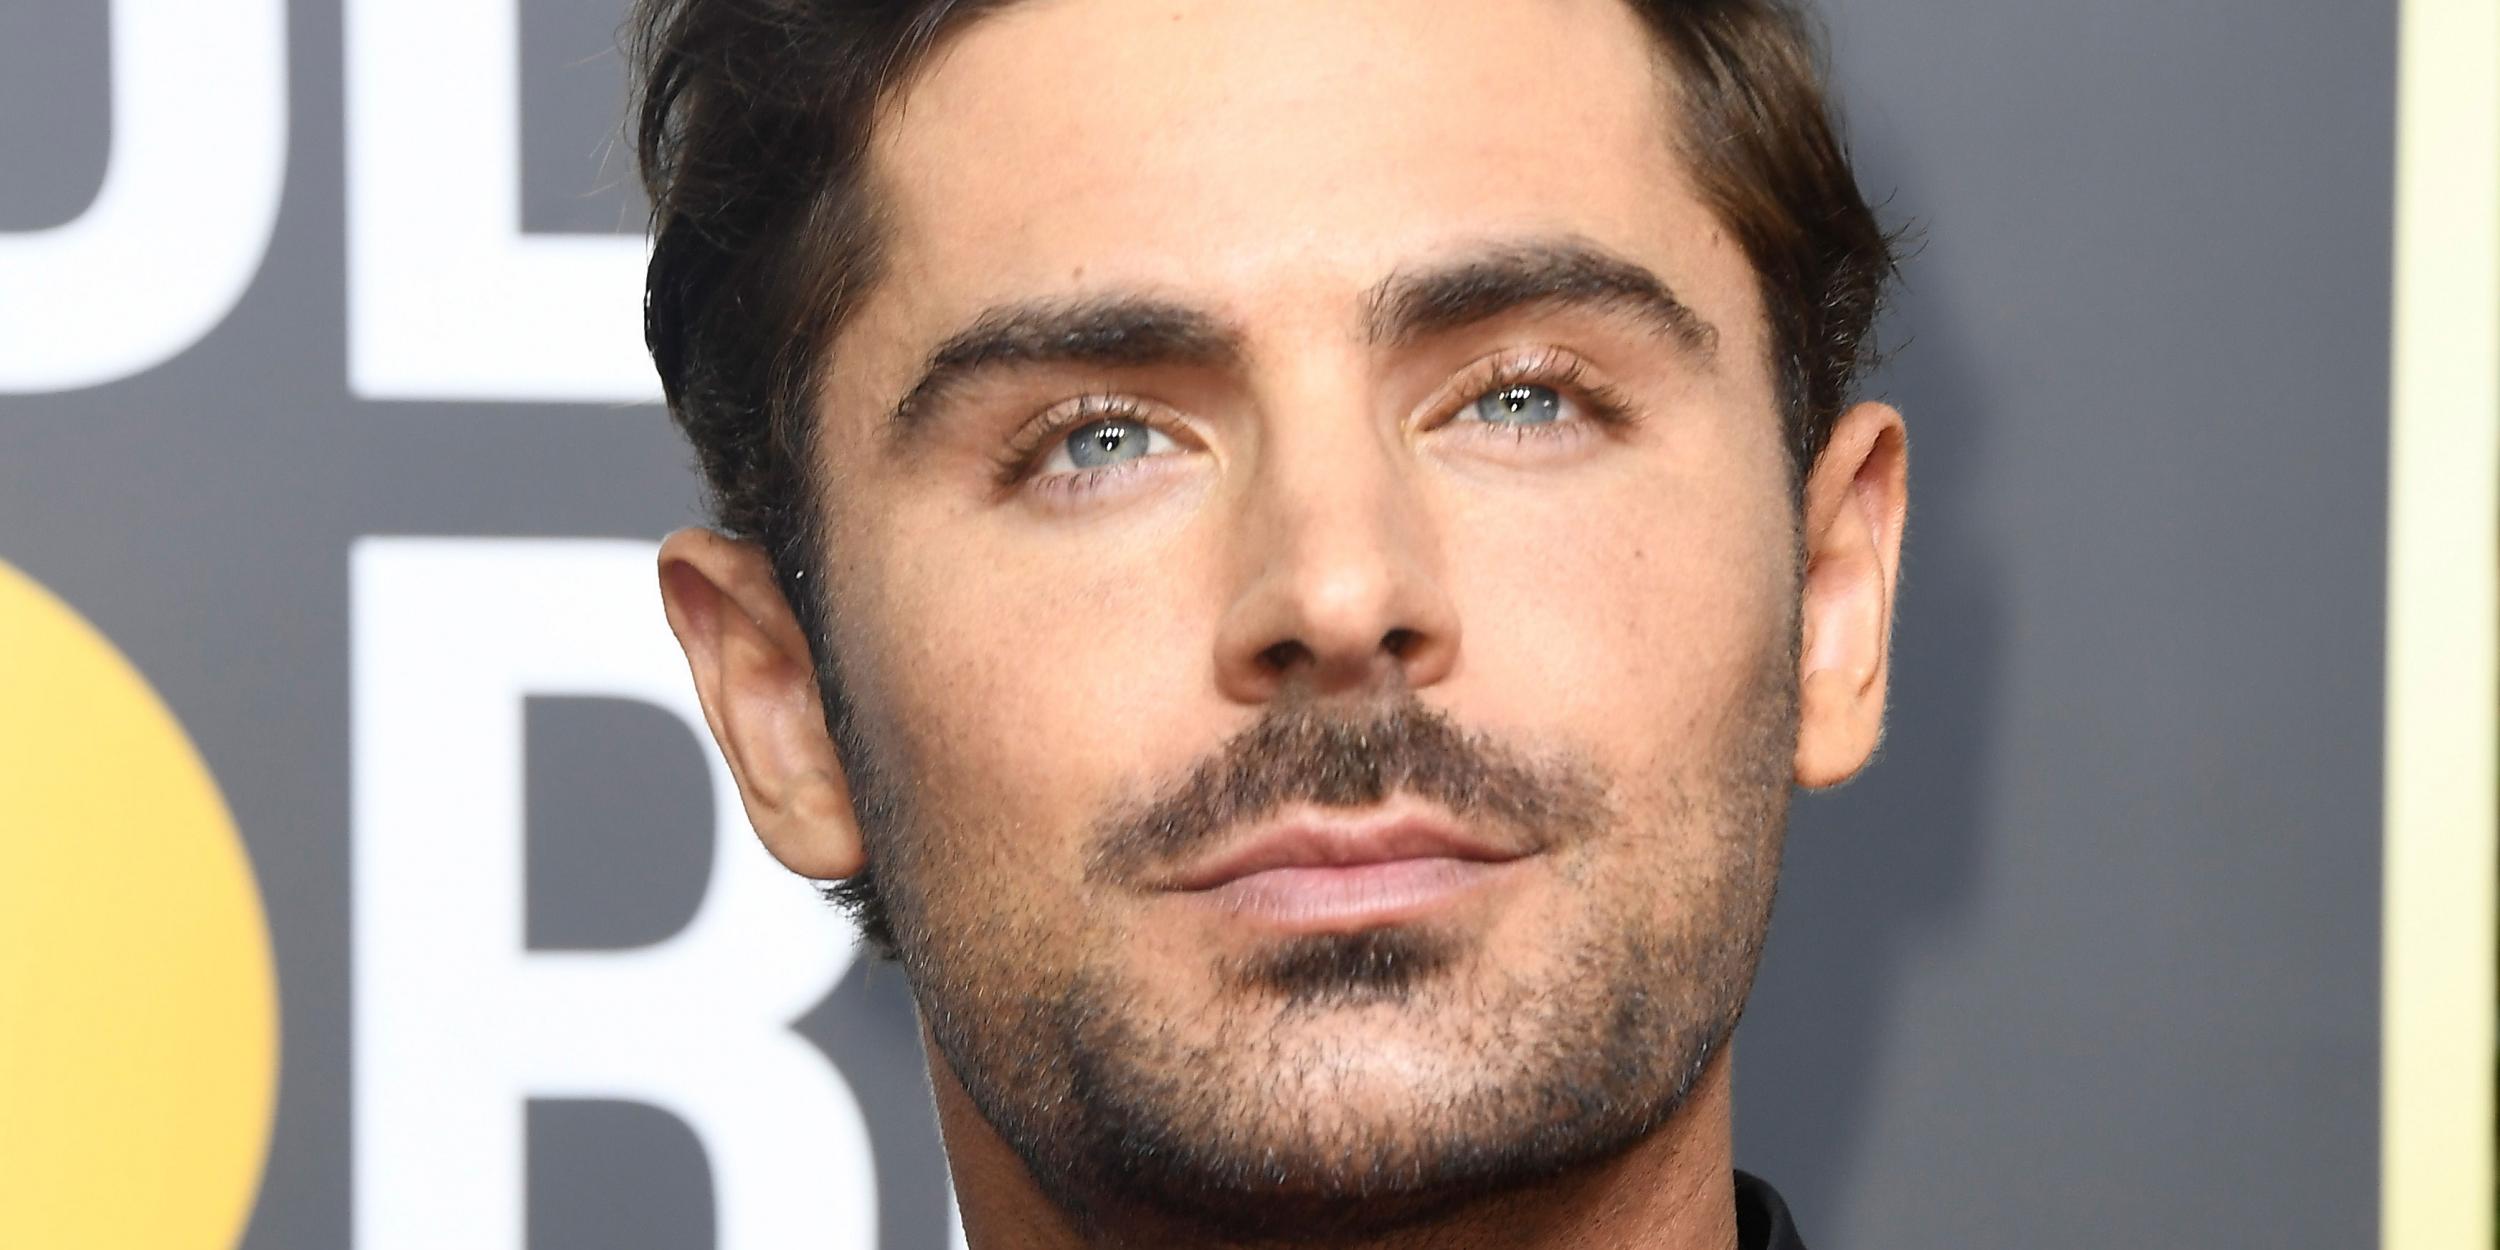 Zac Efron is being accused of cultural appropriation over 